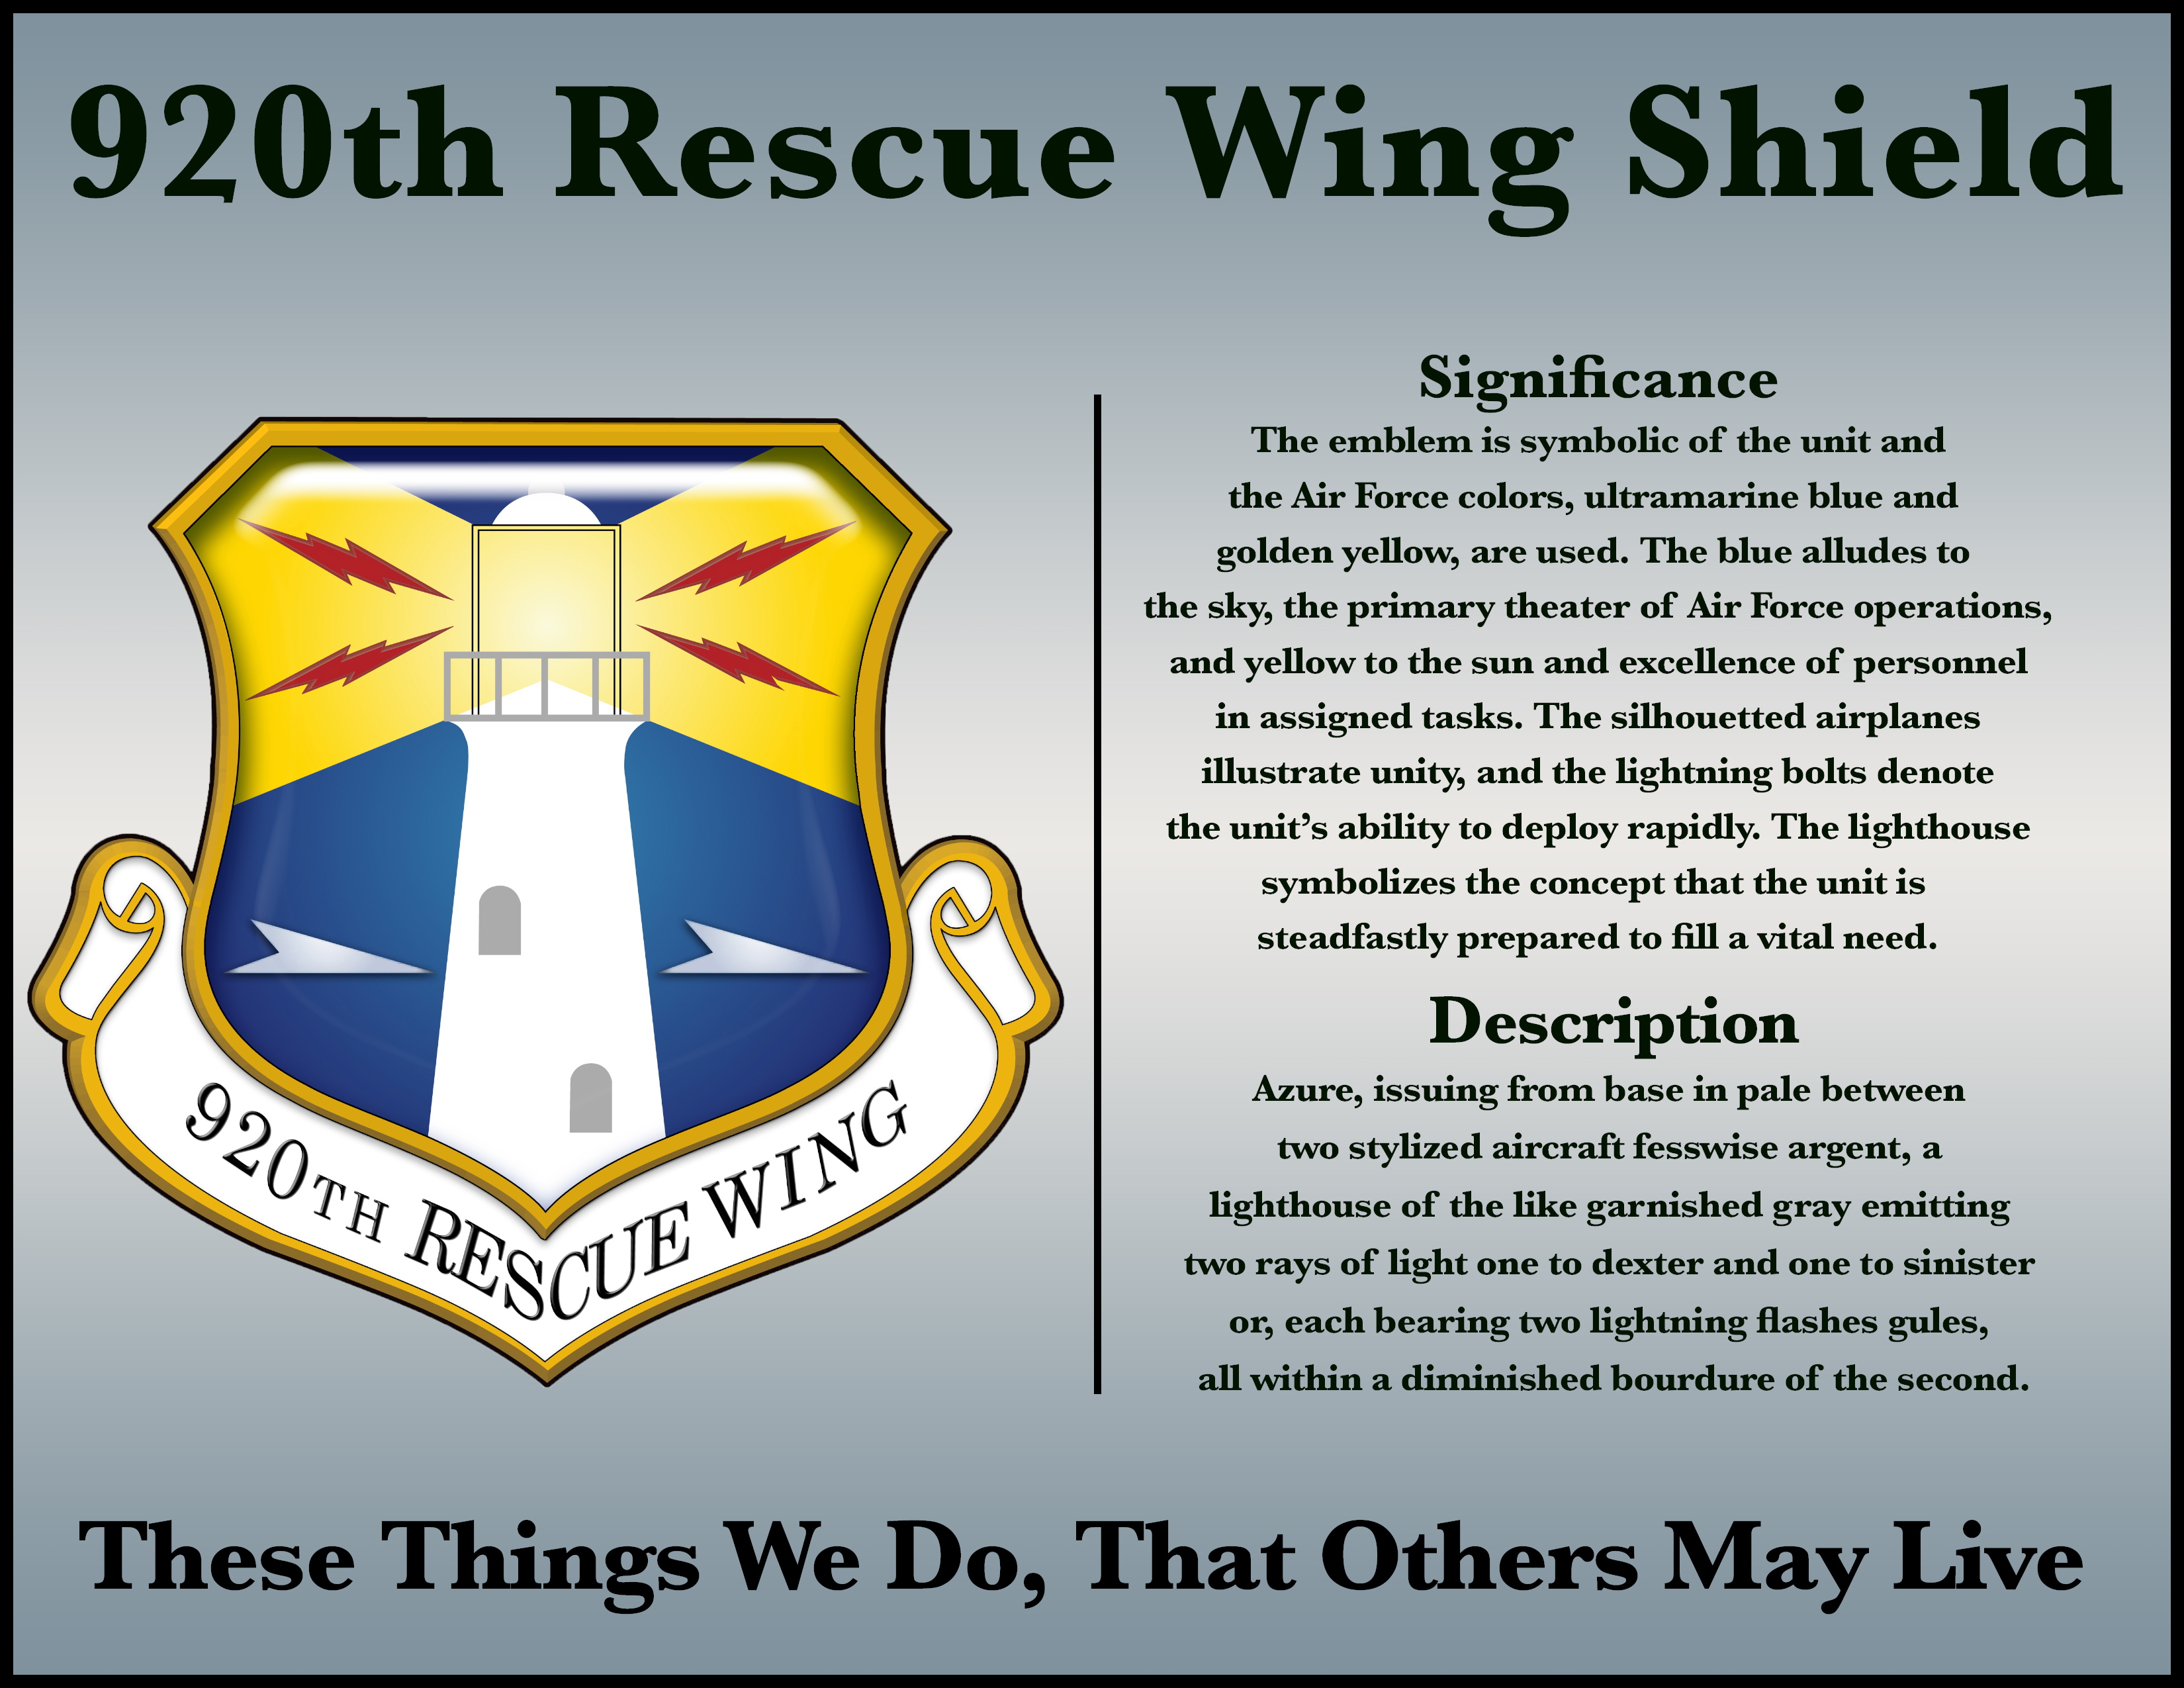 Graphic depicting the 920th Rescue Wing shield significance